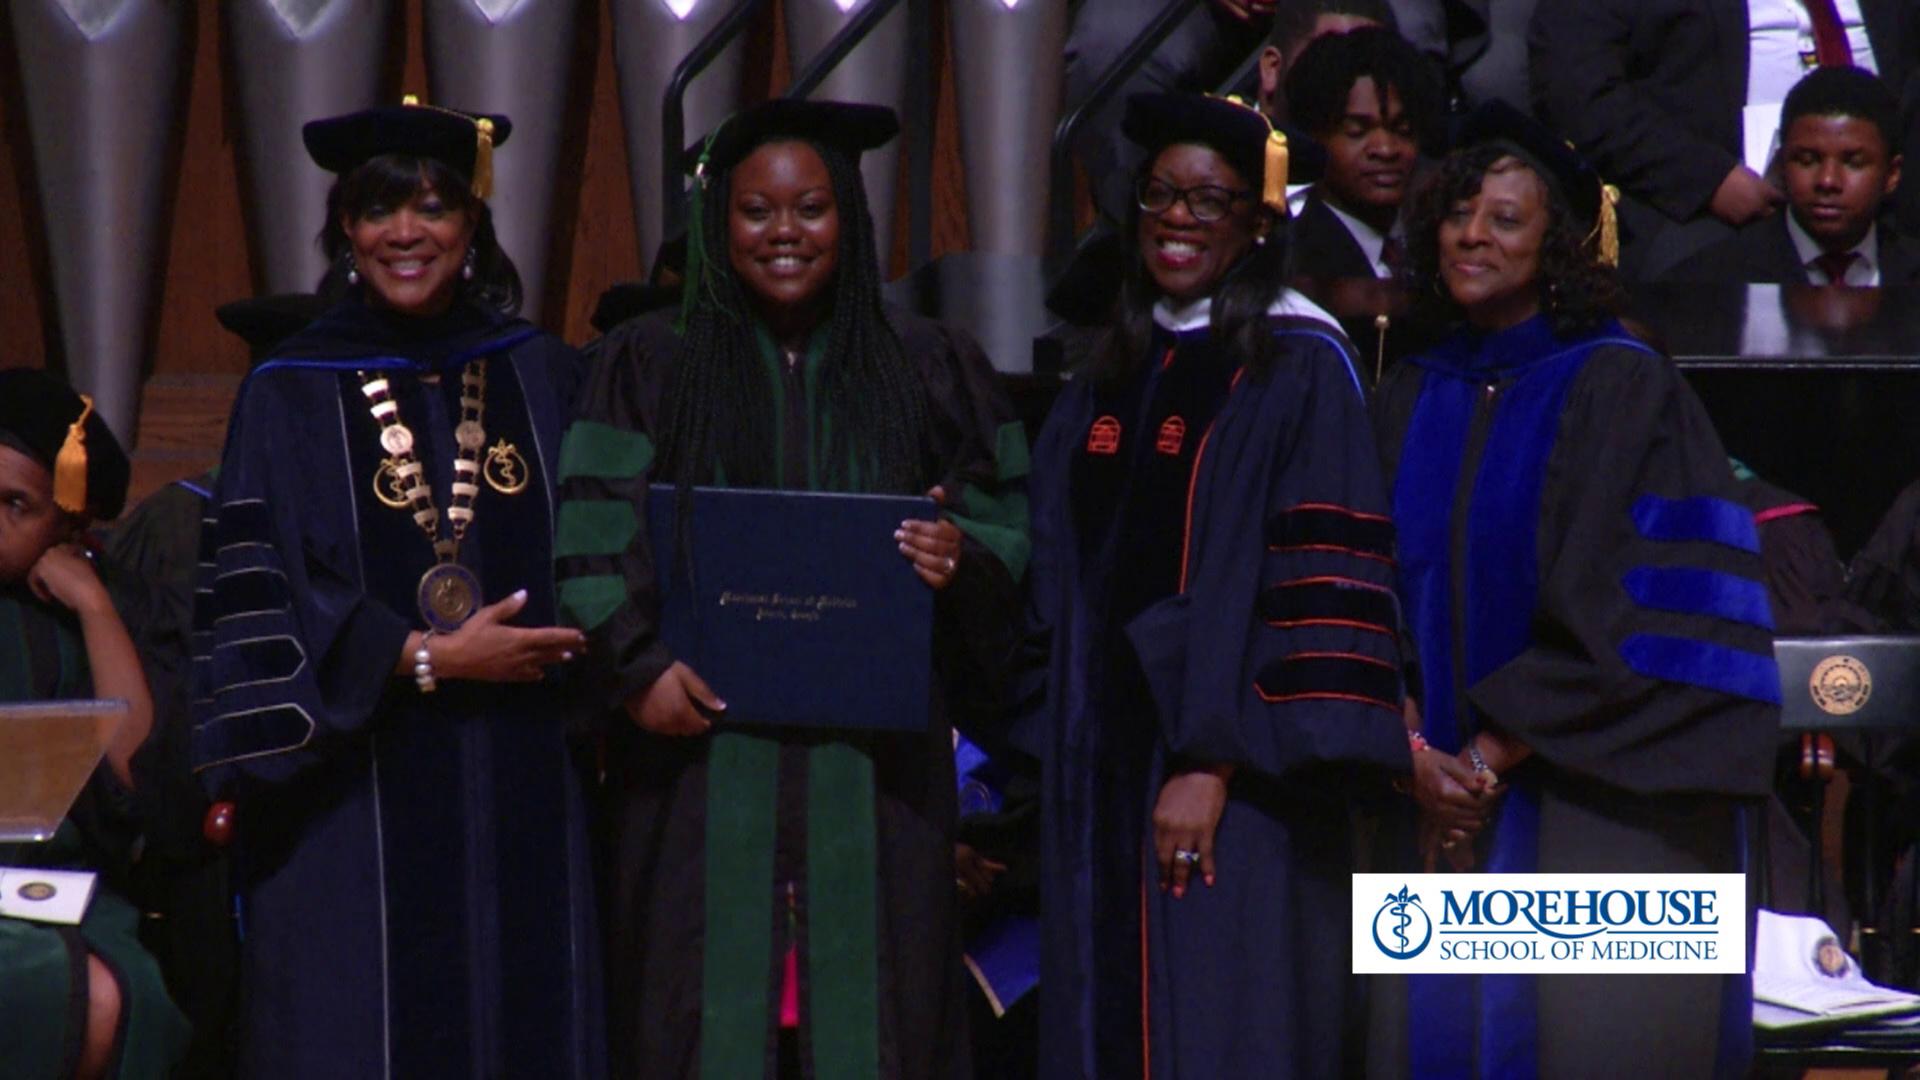 Close up of four Morehouse School Medicine graduates as shown on the event live stream